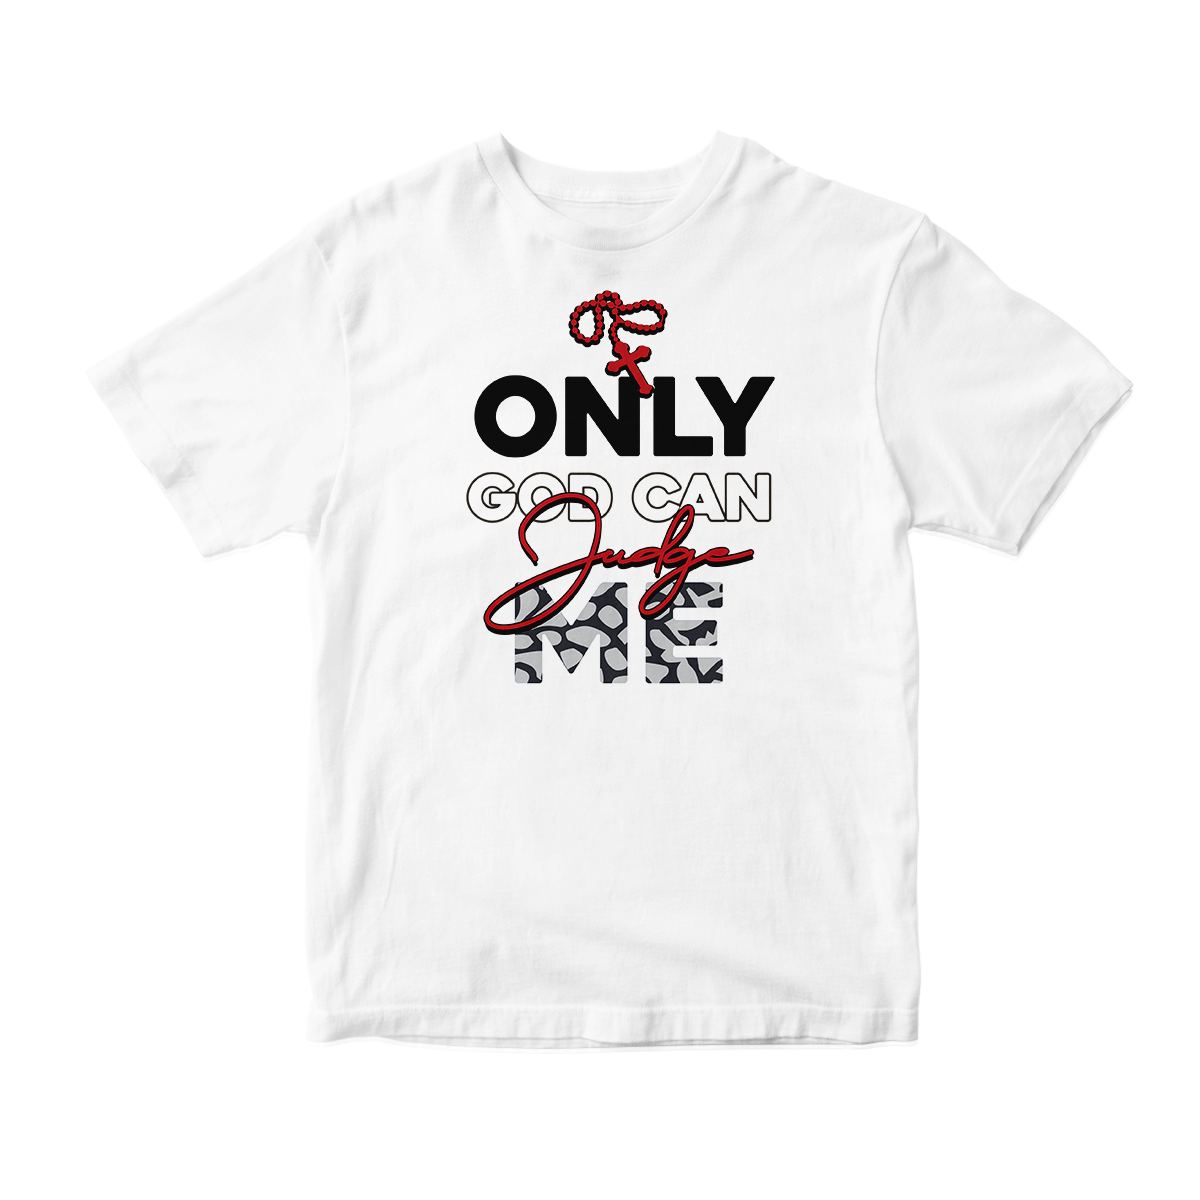 'Only God Can Judge Me' in Red Cement CW Short Sleeve Tee